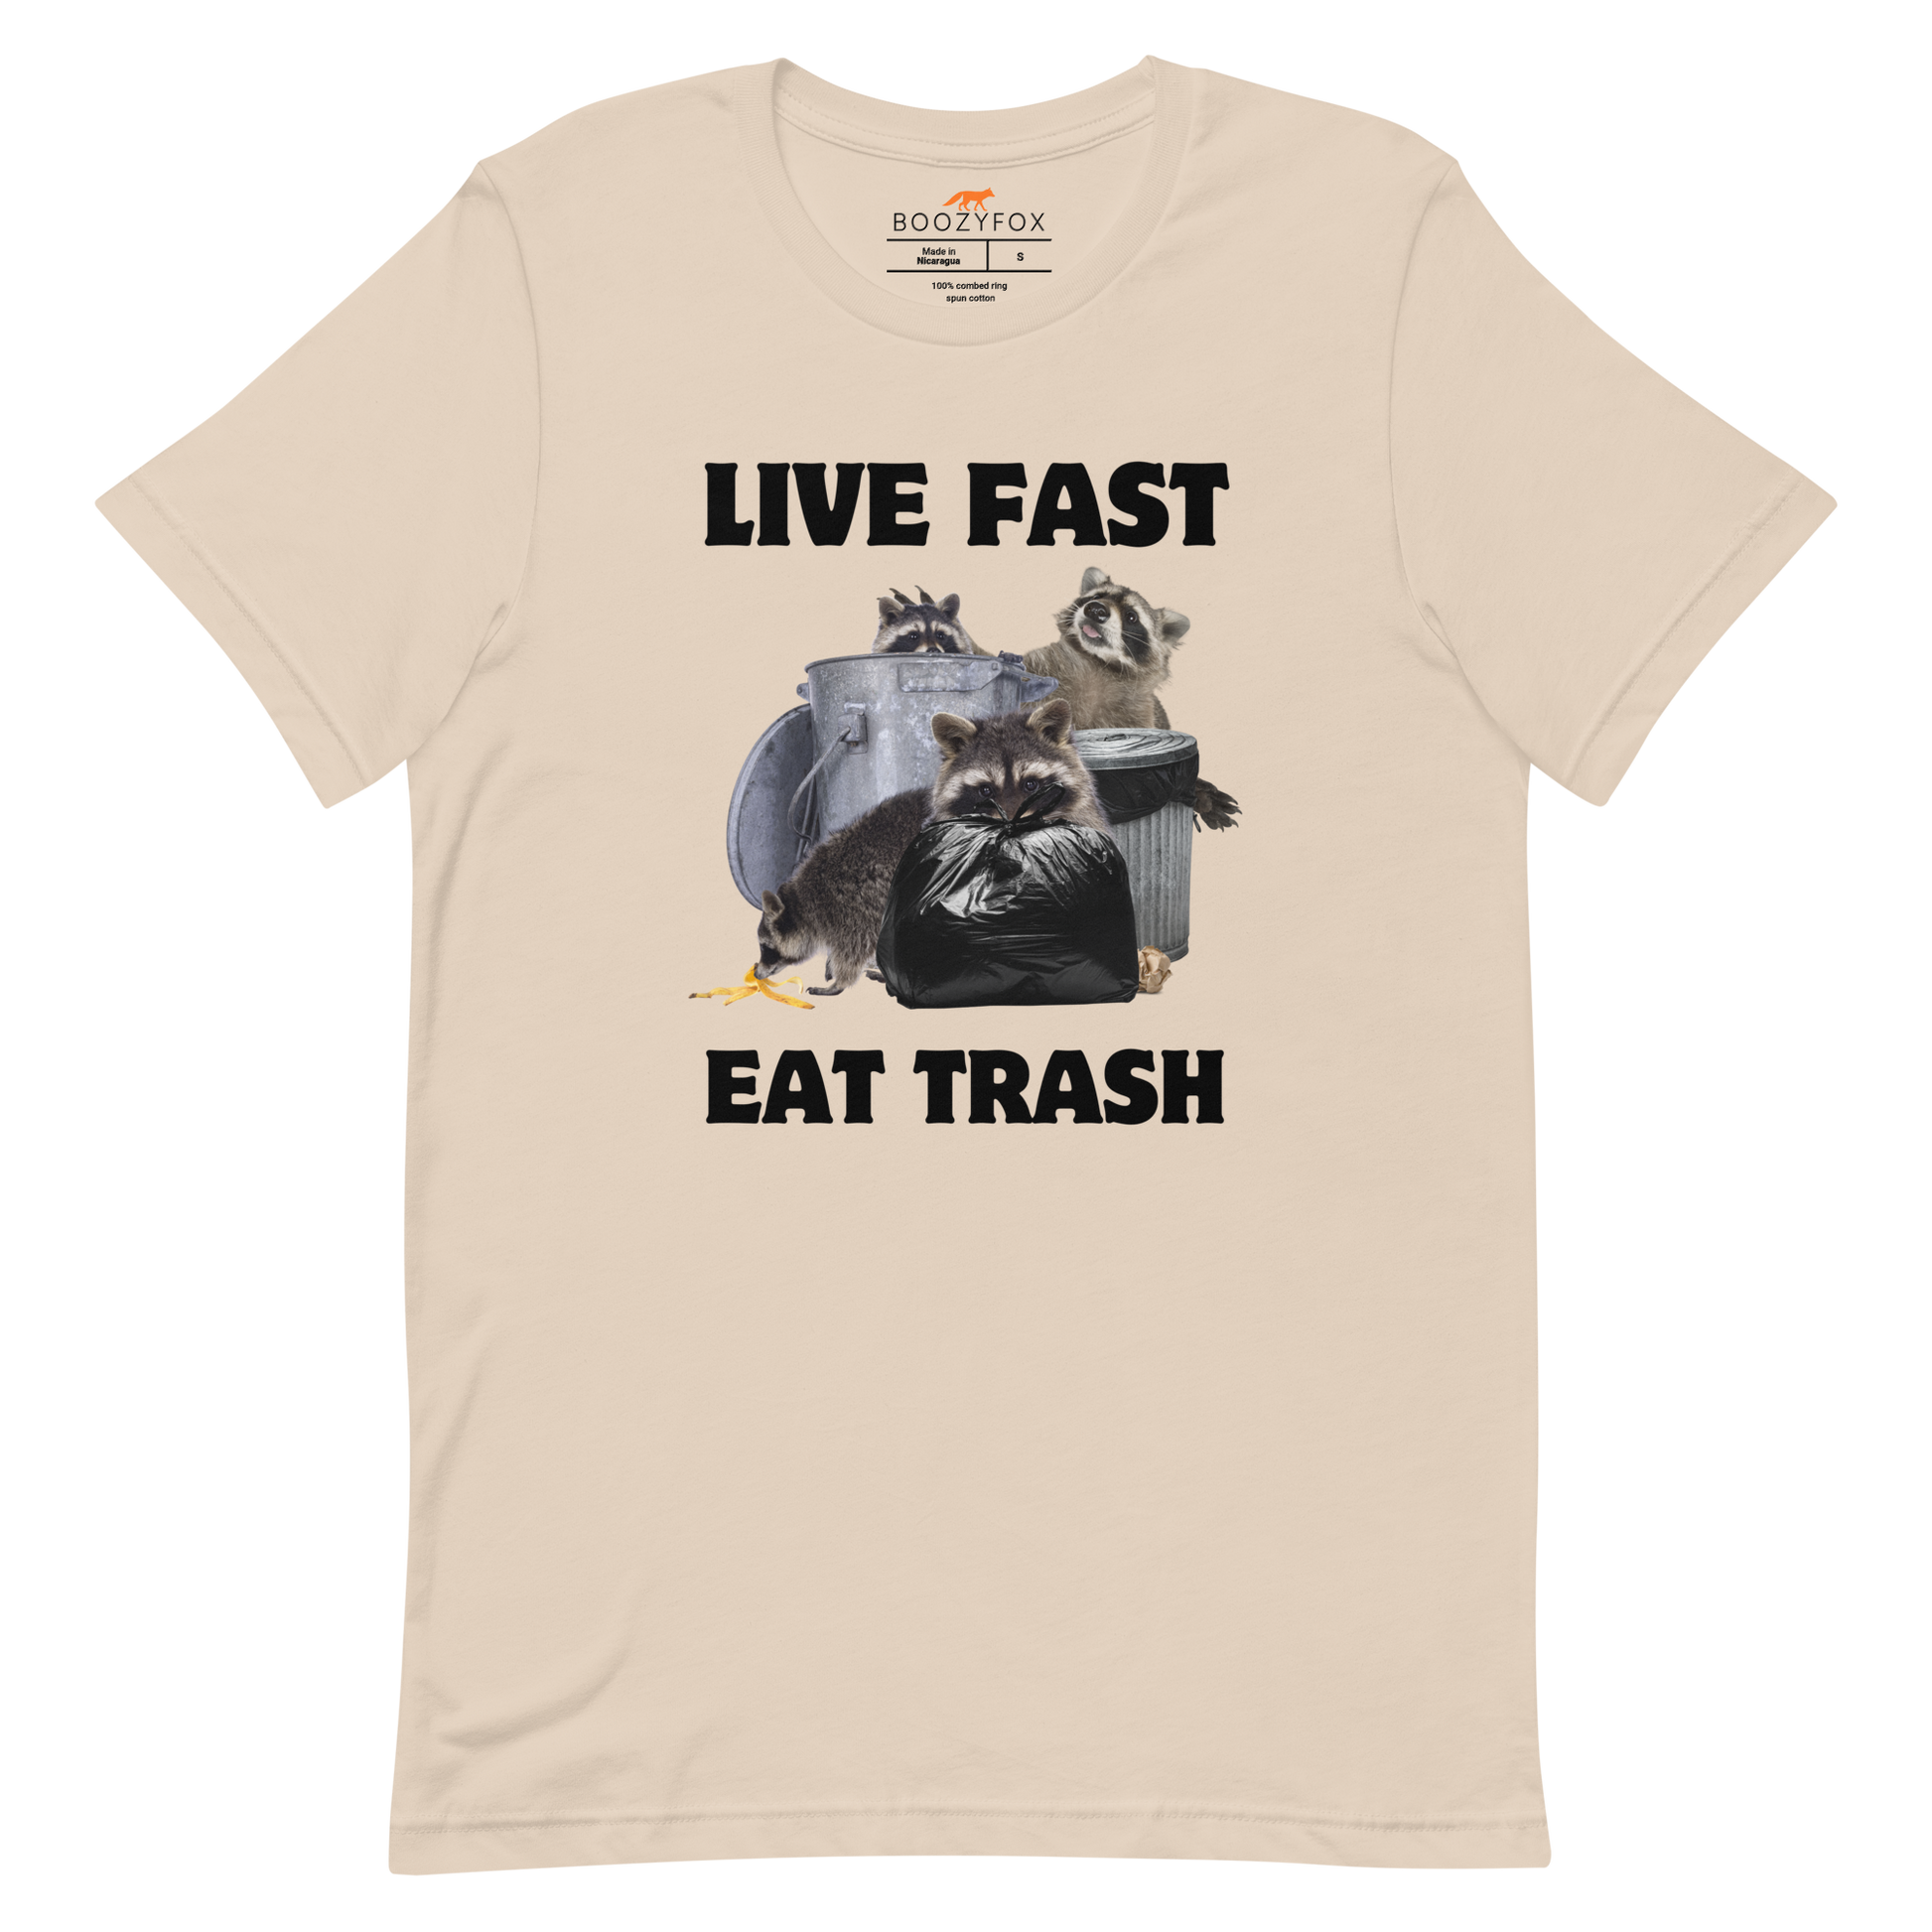 Soft Cream Premium Raccoon Tee featuring a funny 'Live Fast Eat Trash' graphic on the chest - Funny Graphic Raccoon Tees - Boozy Fox